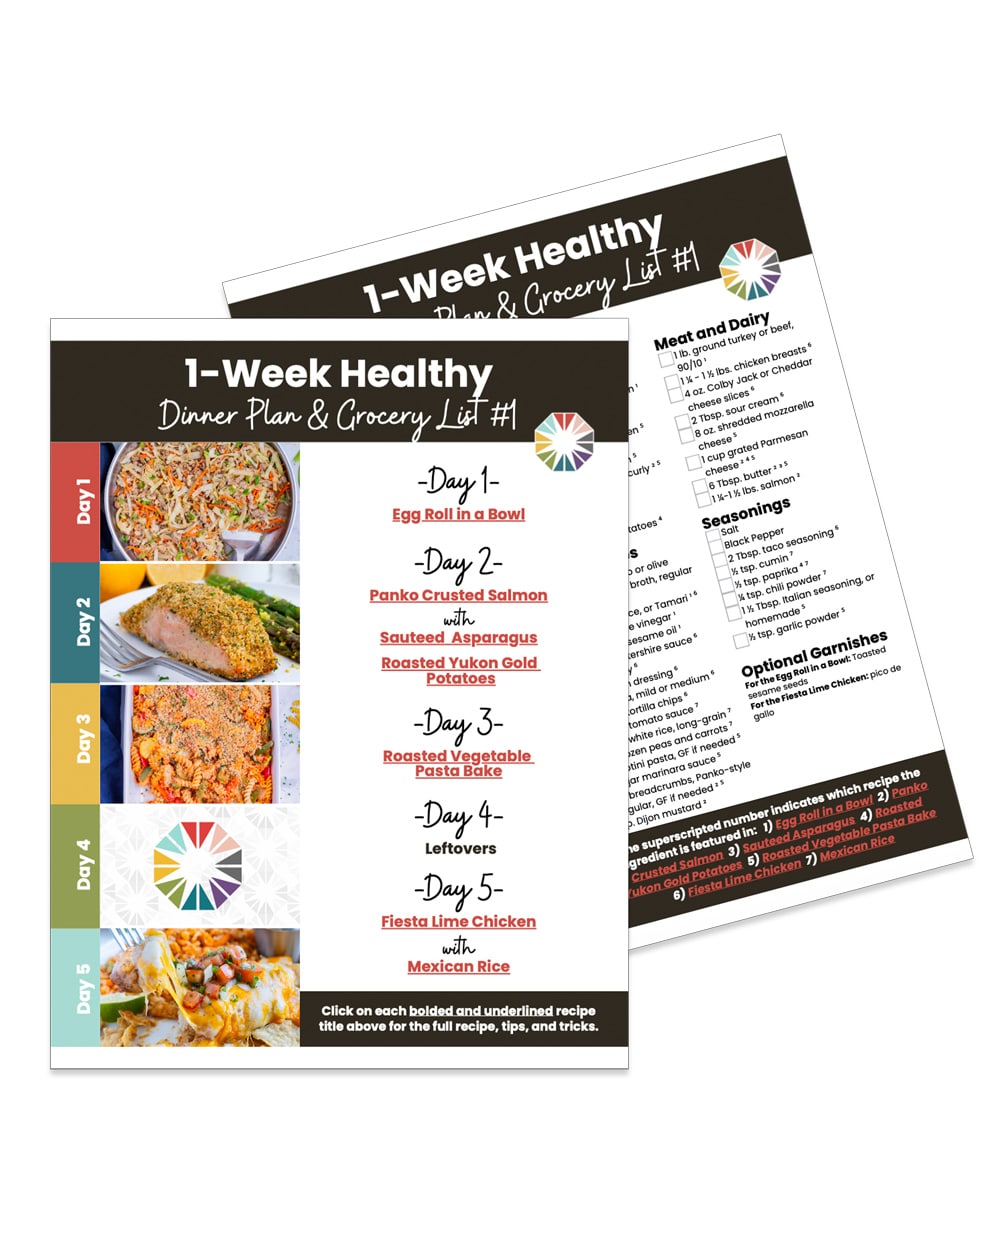 A free 1-week healthy dinner meal plan and grocery list.